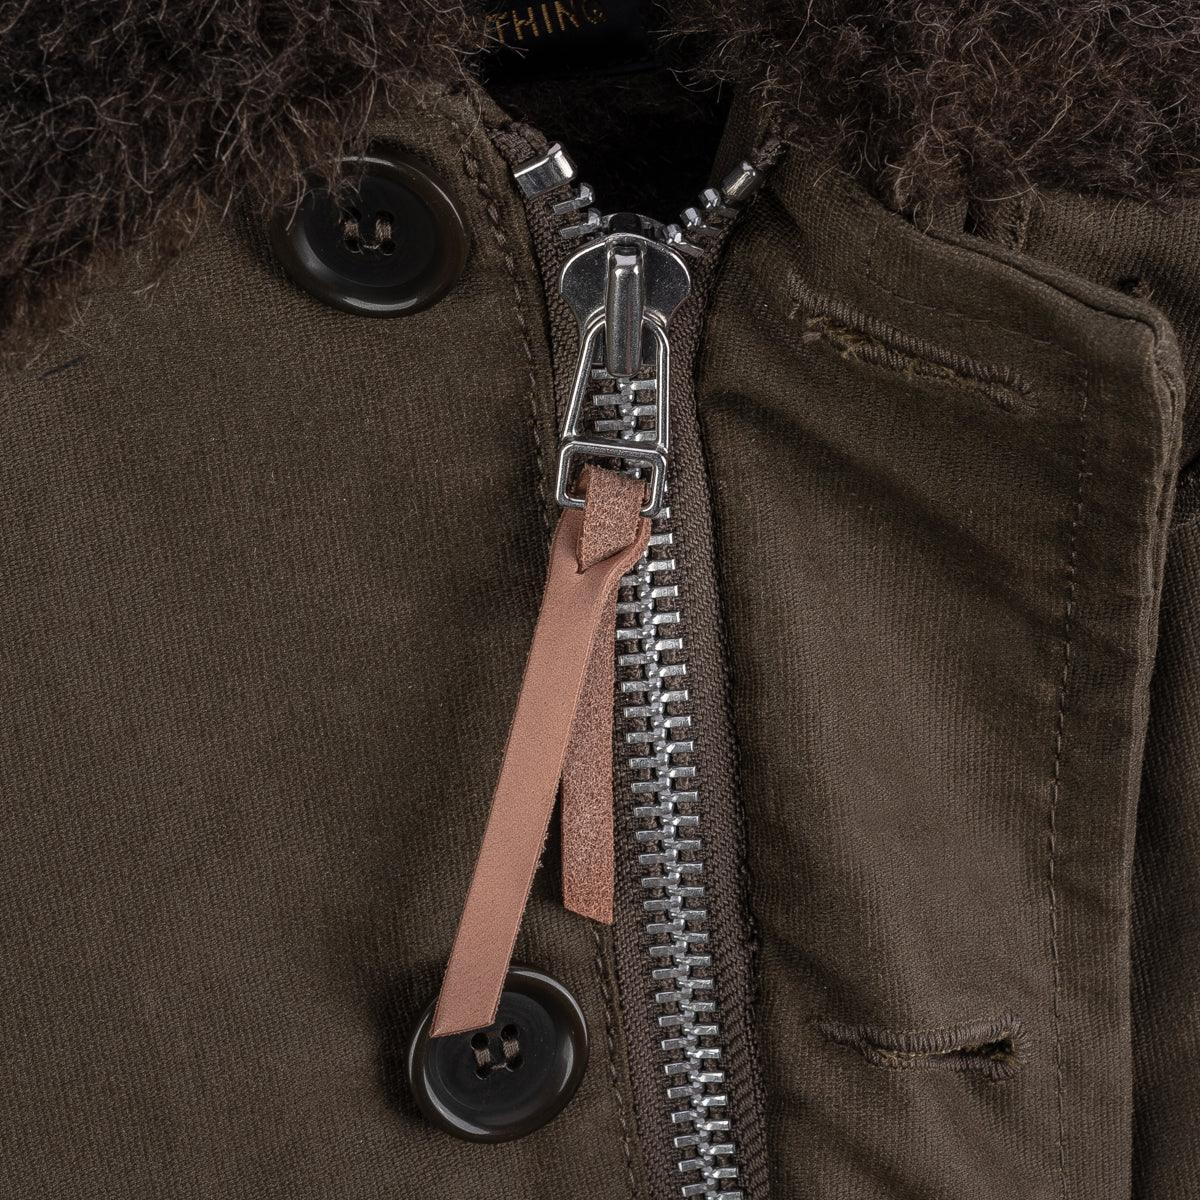 Image showing the IHM-37-ODG - Oiled Whipcord N1 Deck Jacket - Olive Drab Green which is a Jackets described by the following info Iron Heart, Jackets, Released, Tops and sold on the IRON HEART GERMANY online store